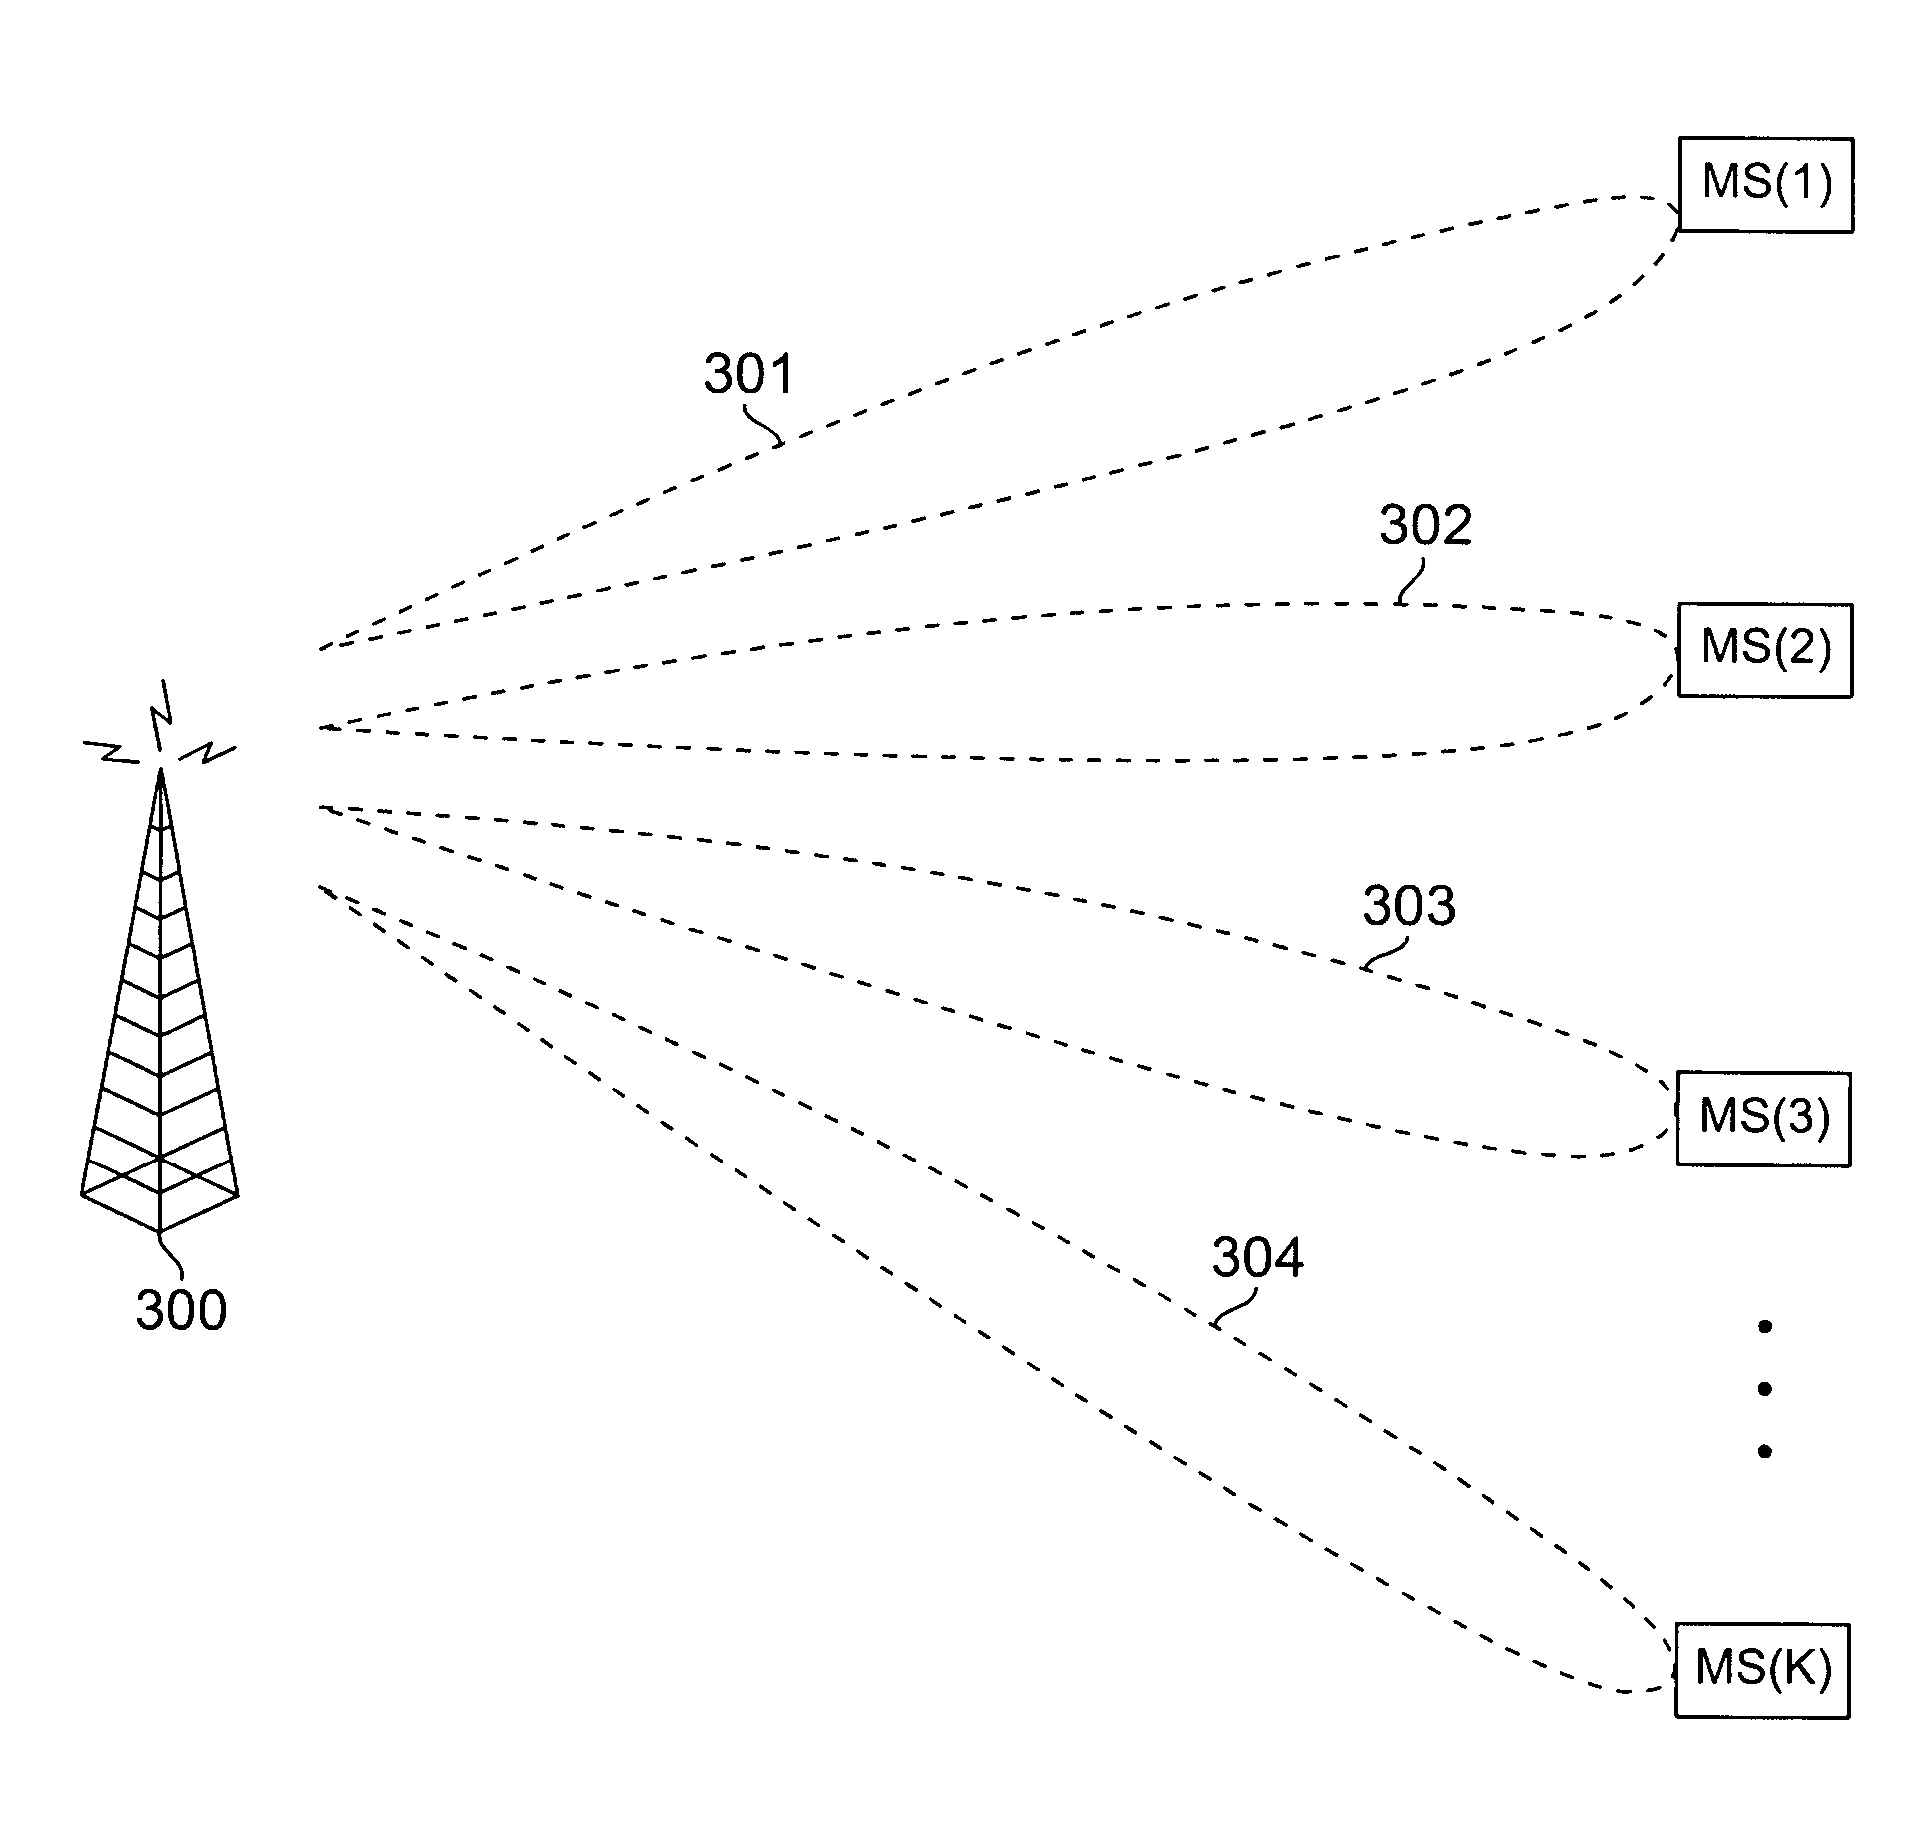 Apparatus and method for downlink spatial division multiple access scheduling in a wireless network